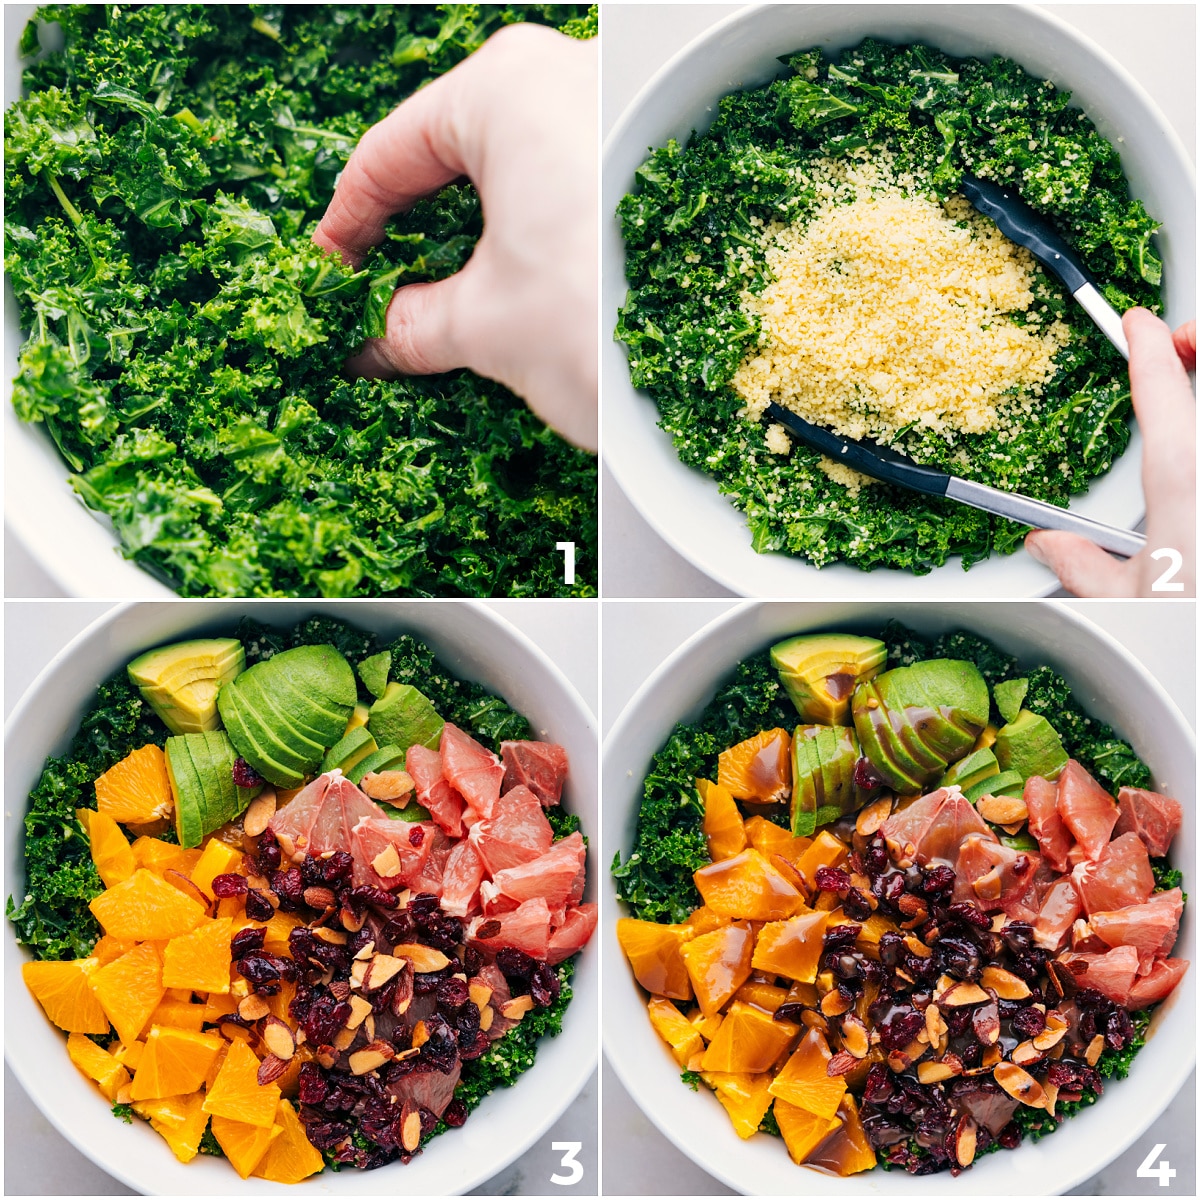 Kale, couscous, nuts, and fruit being added to a bowl and it all being dressed.